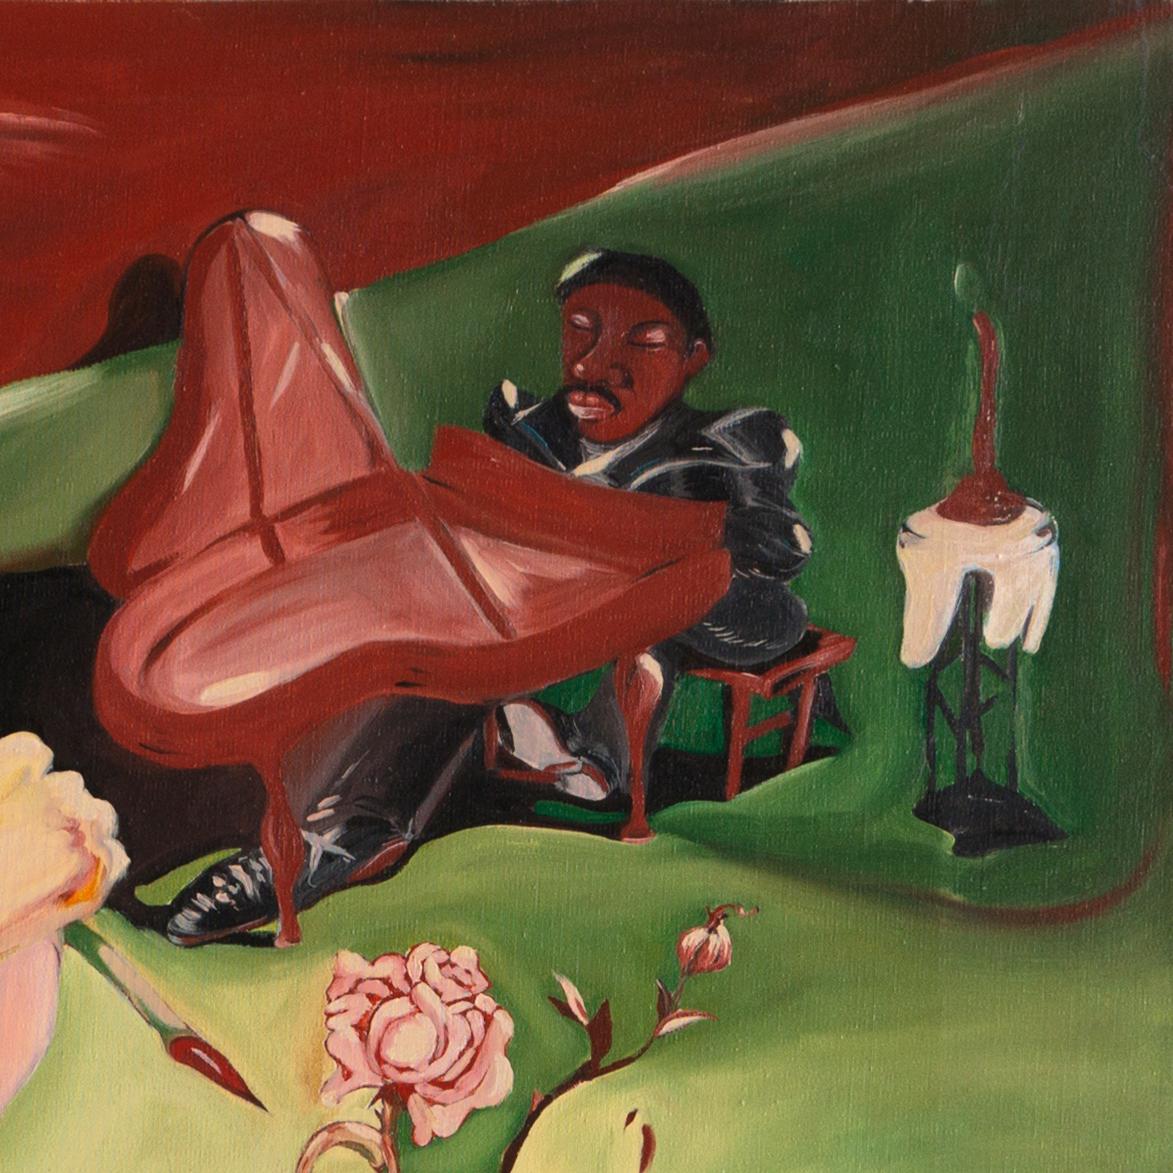 Signed lower center, 'Bazil' and dated November, 1974.

A substantial and lyrical, Post-Impressionist figural oil showing a blonde woman in an evening gown preparing a rose-arrow as a man in a black beret plays piano by candlelight.